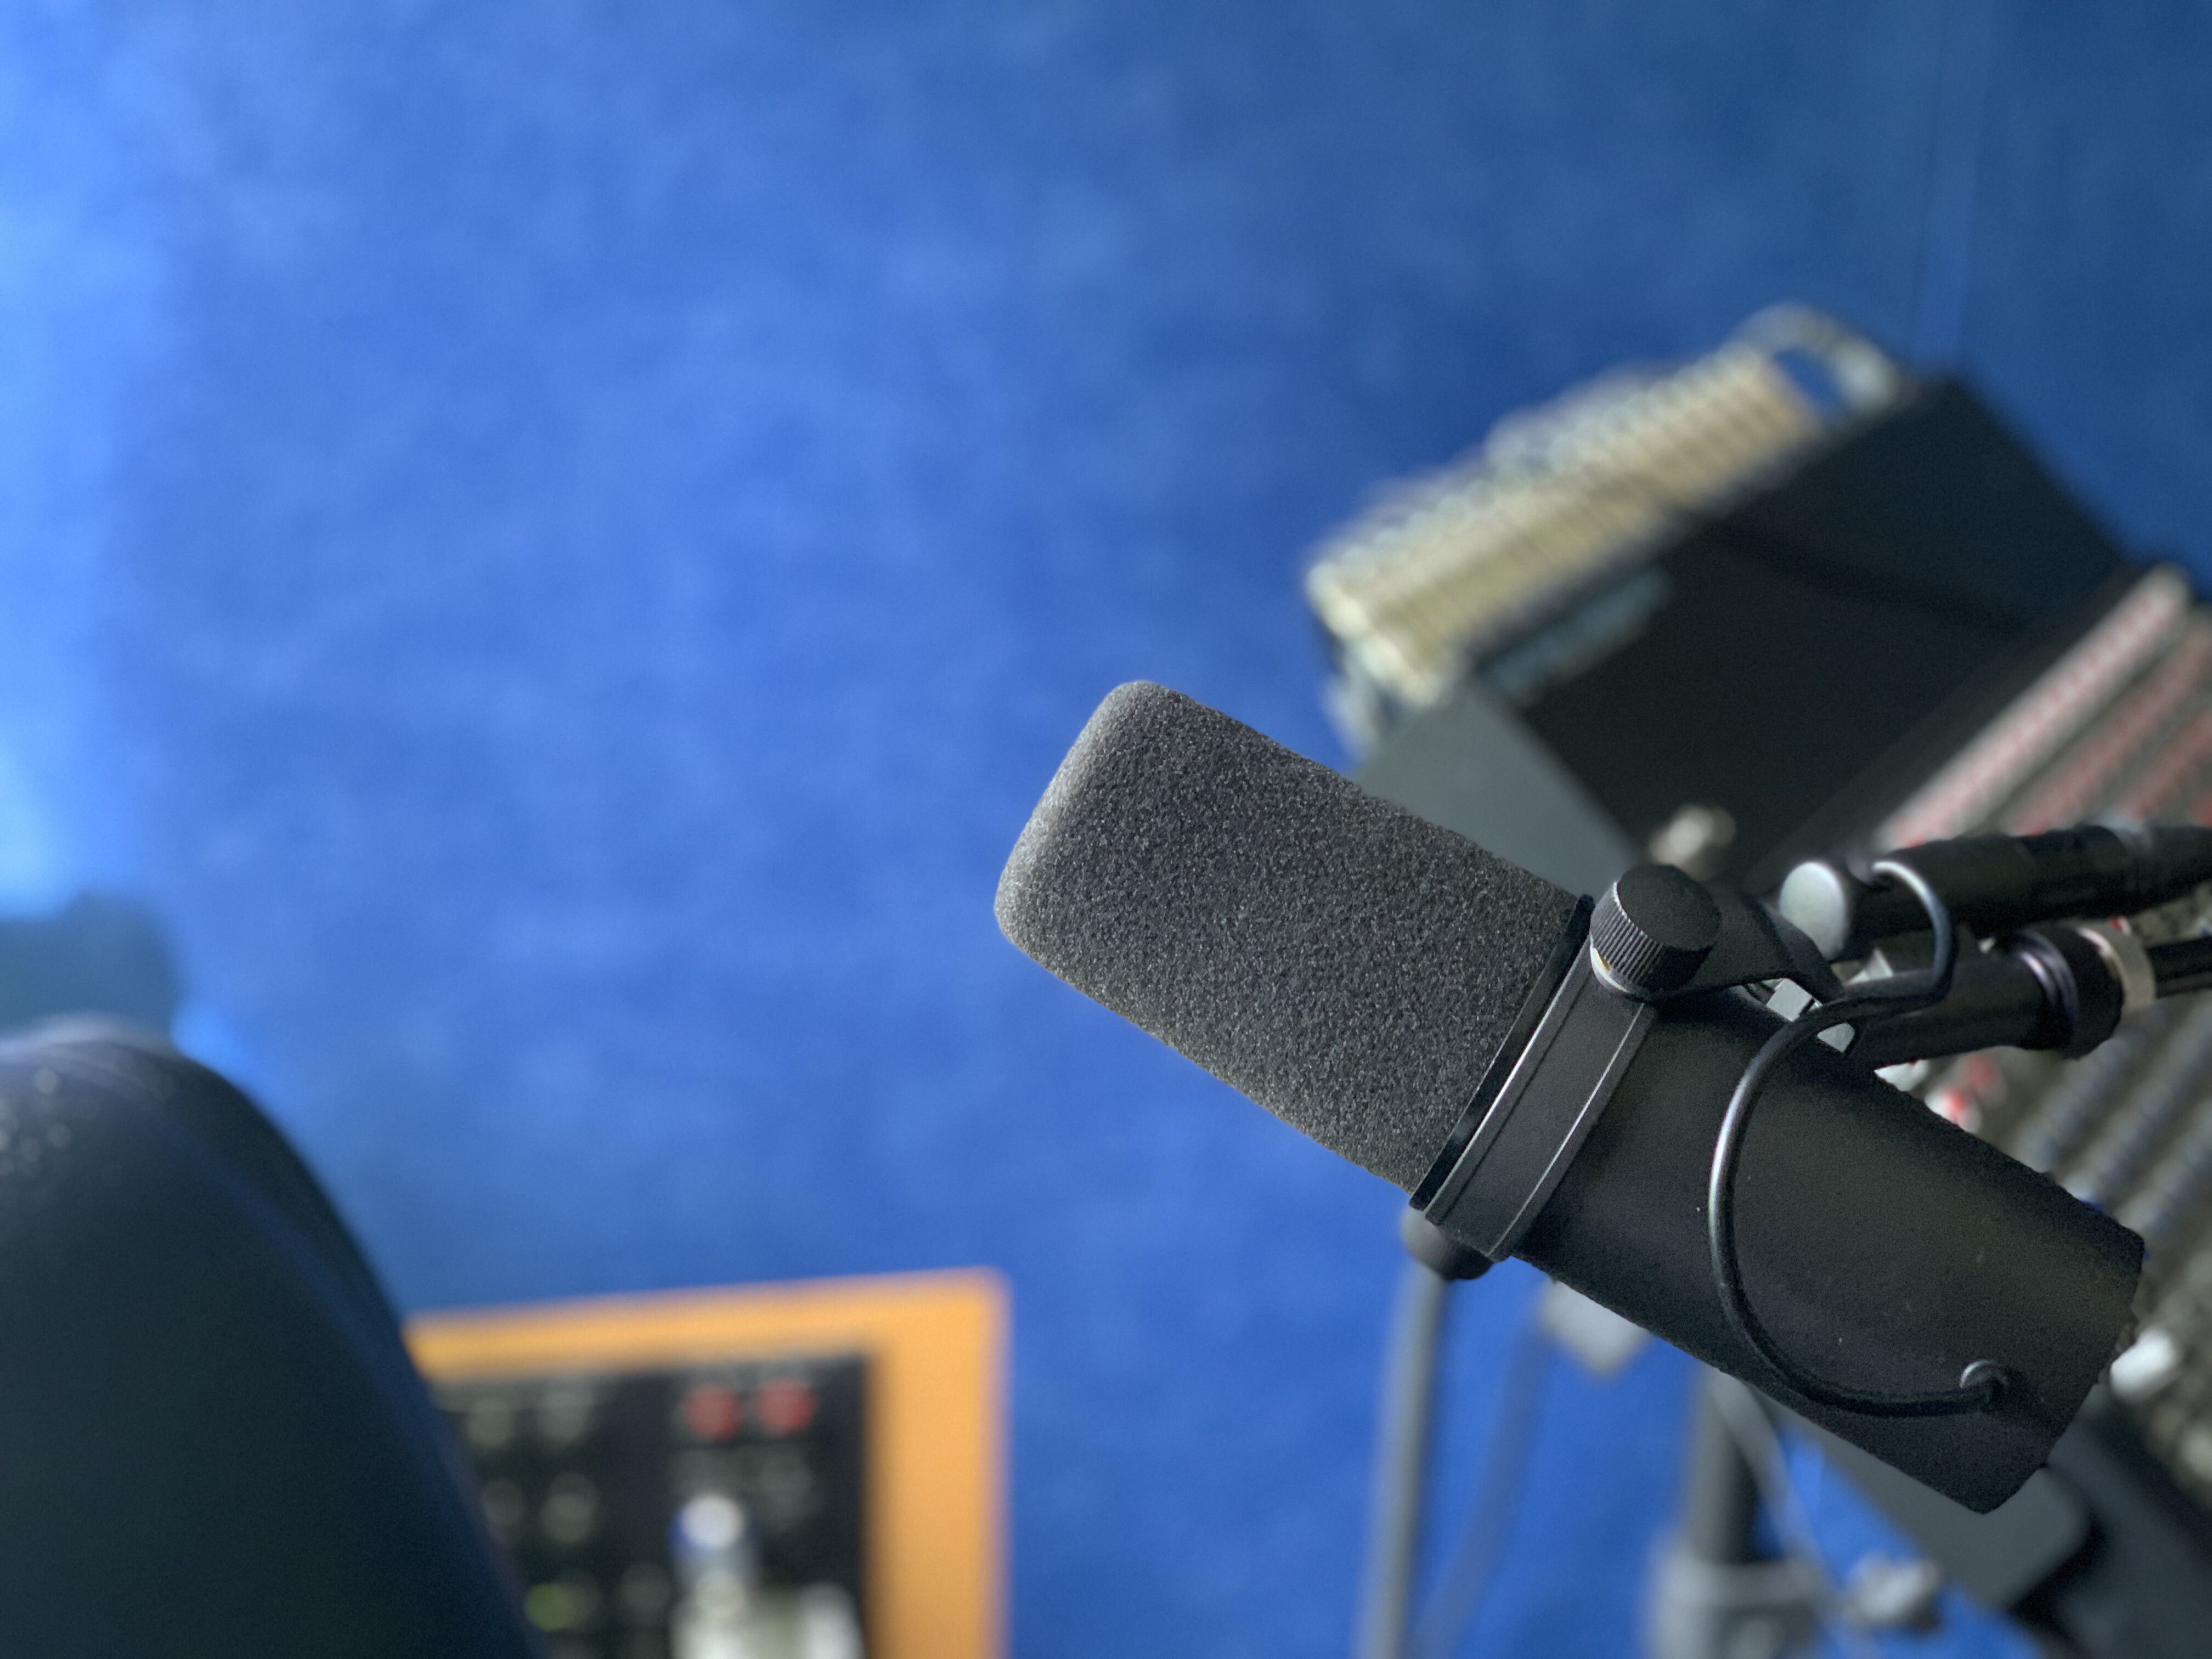 The microphone in Steven Leavitt's studio with blue background and mixing board